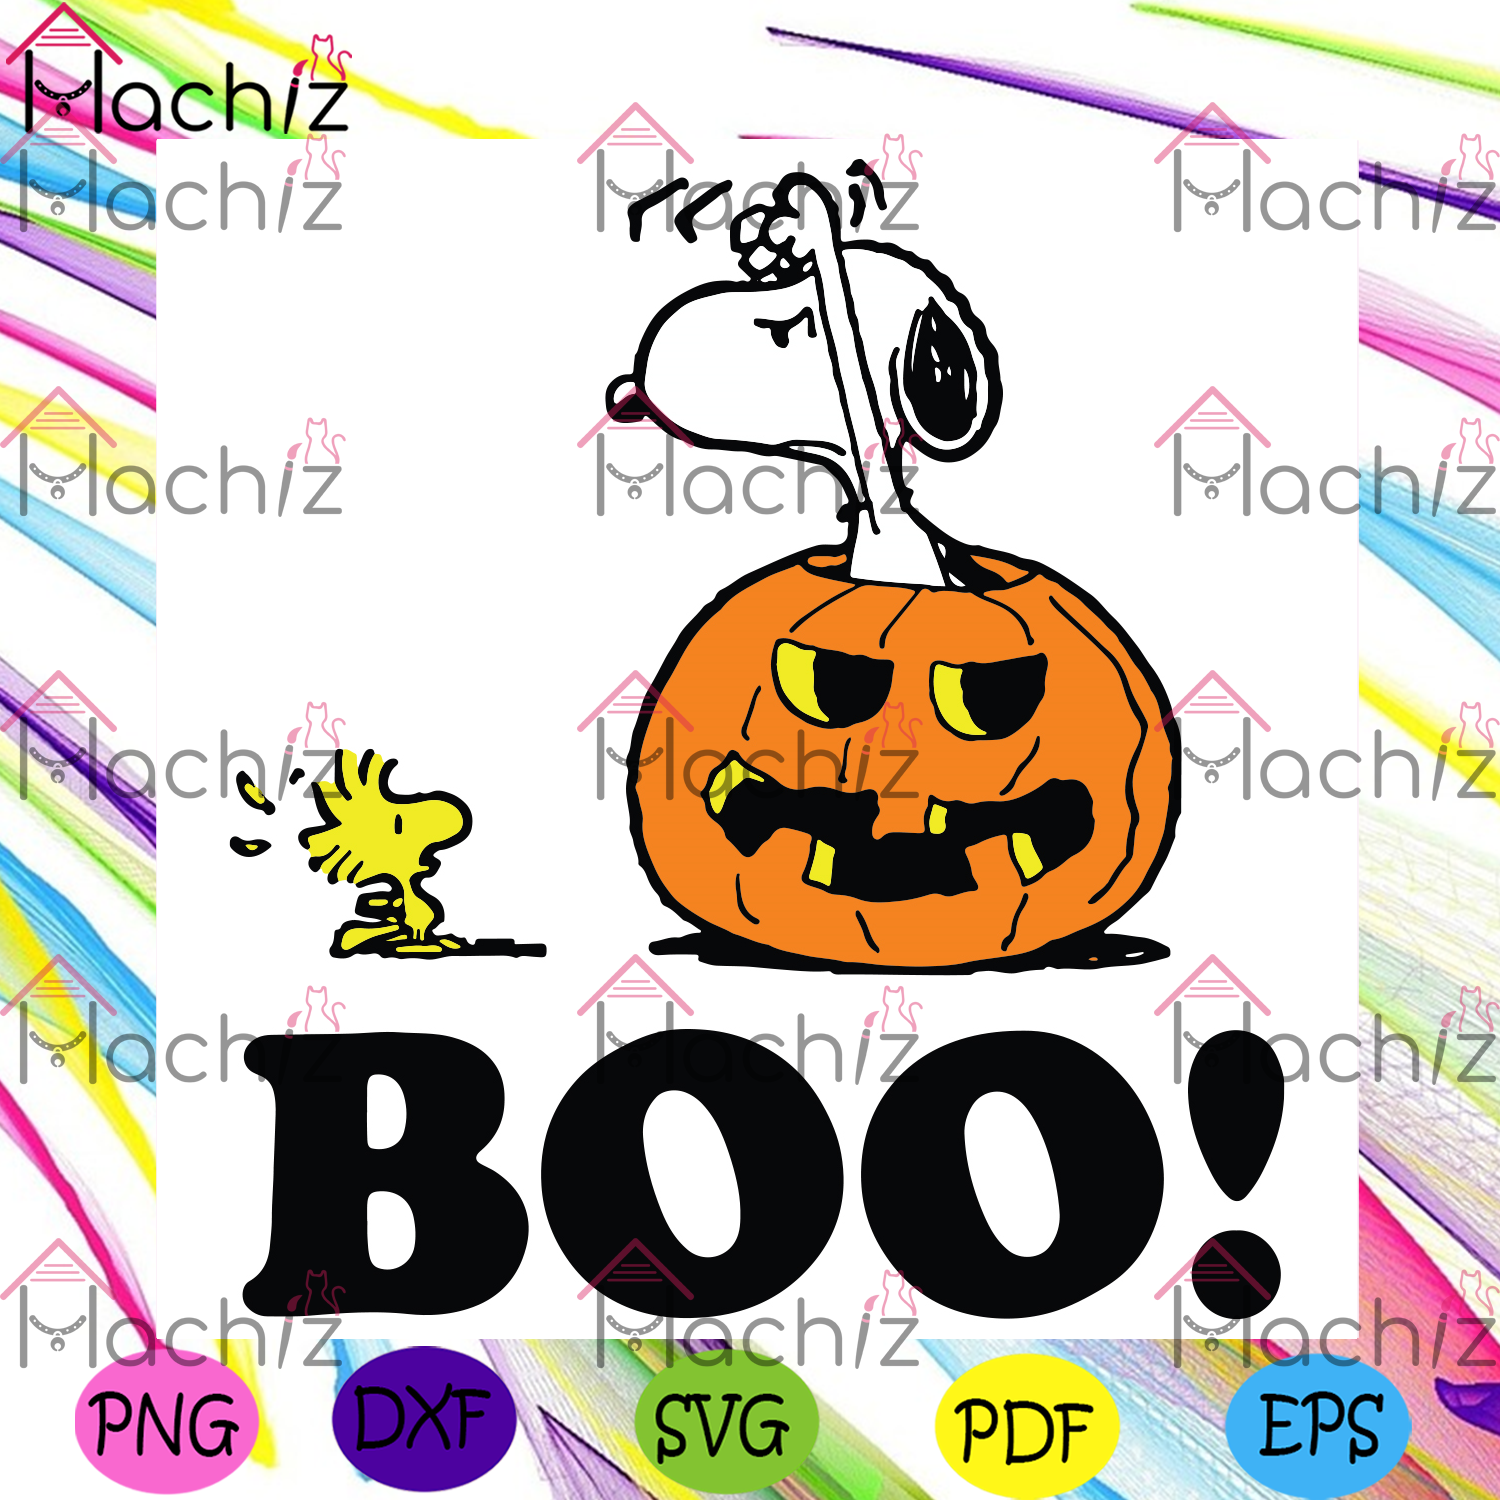 Download Snoopy And Woodstock Boo Svg Snoopy Svg Pumpkin Svg Snoopy In Pumpk Hachizstore